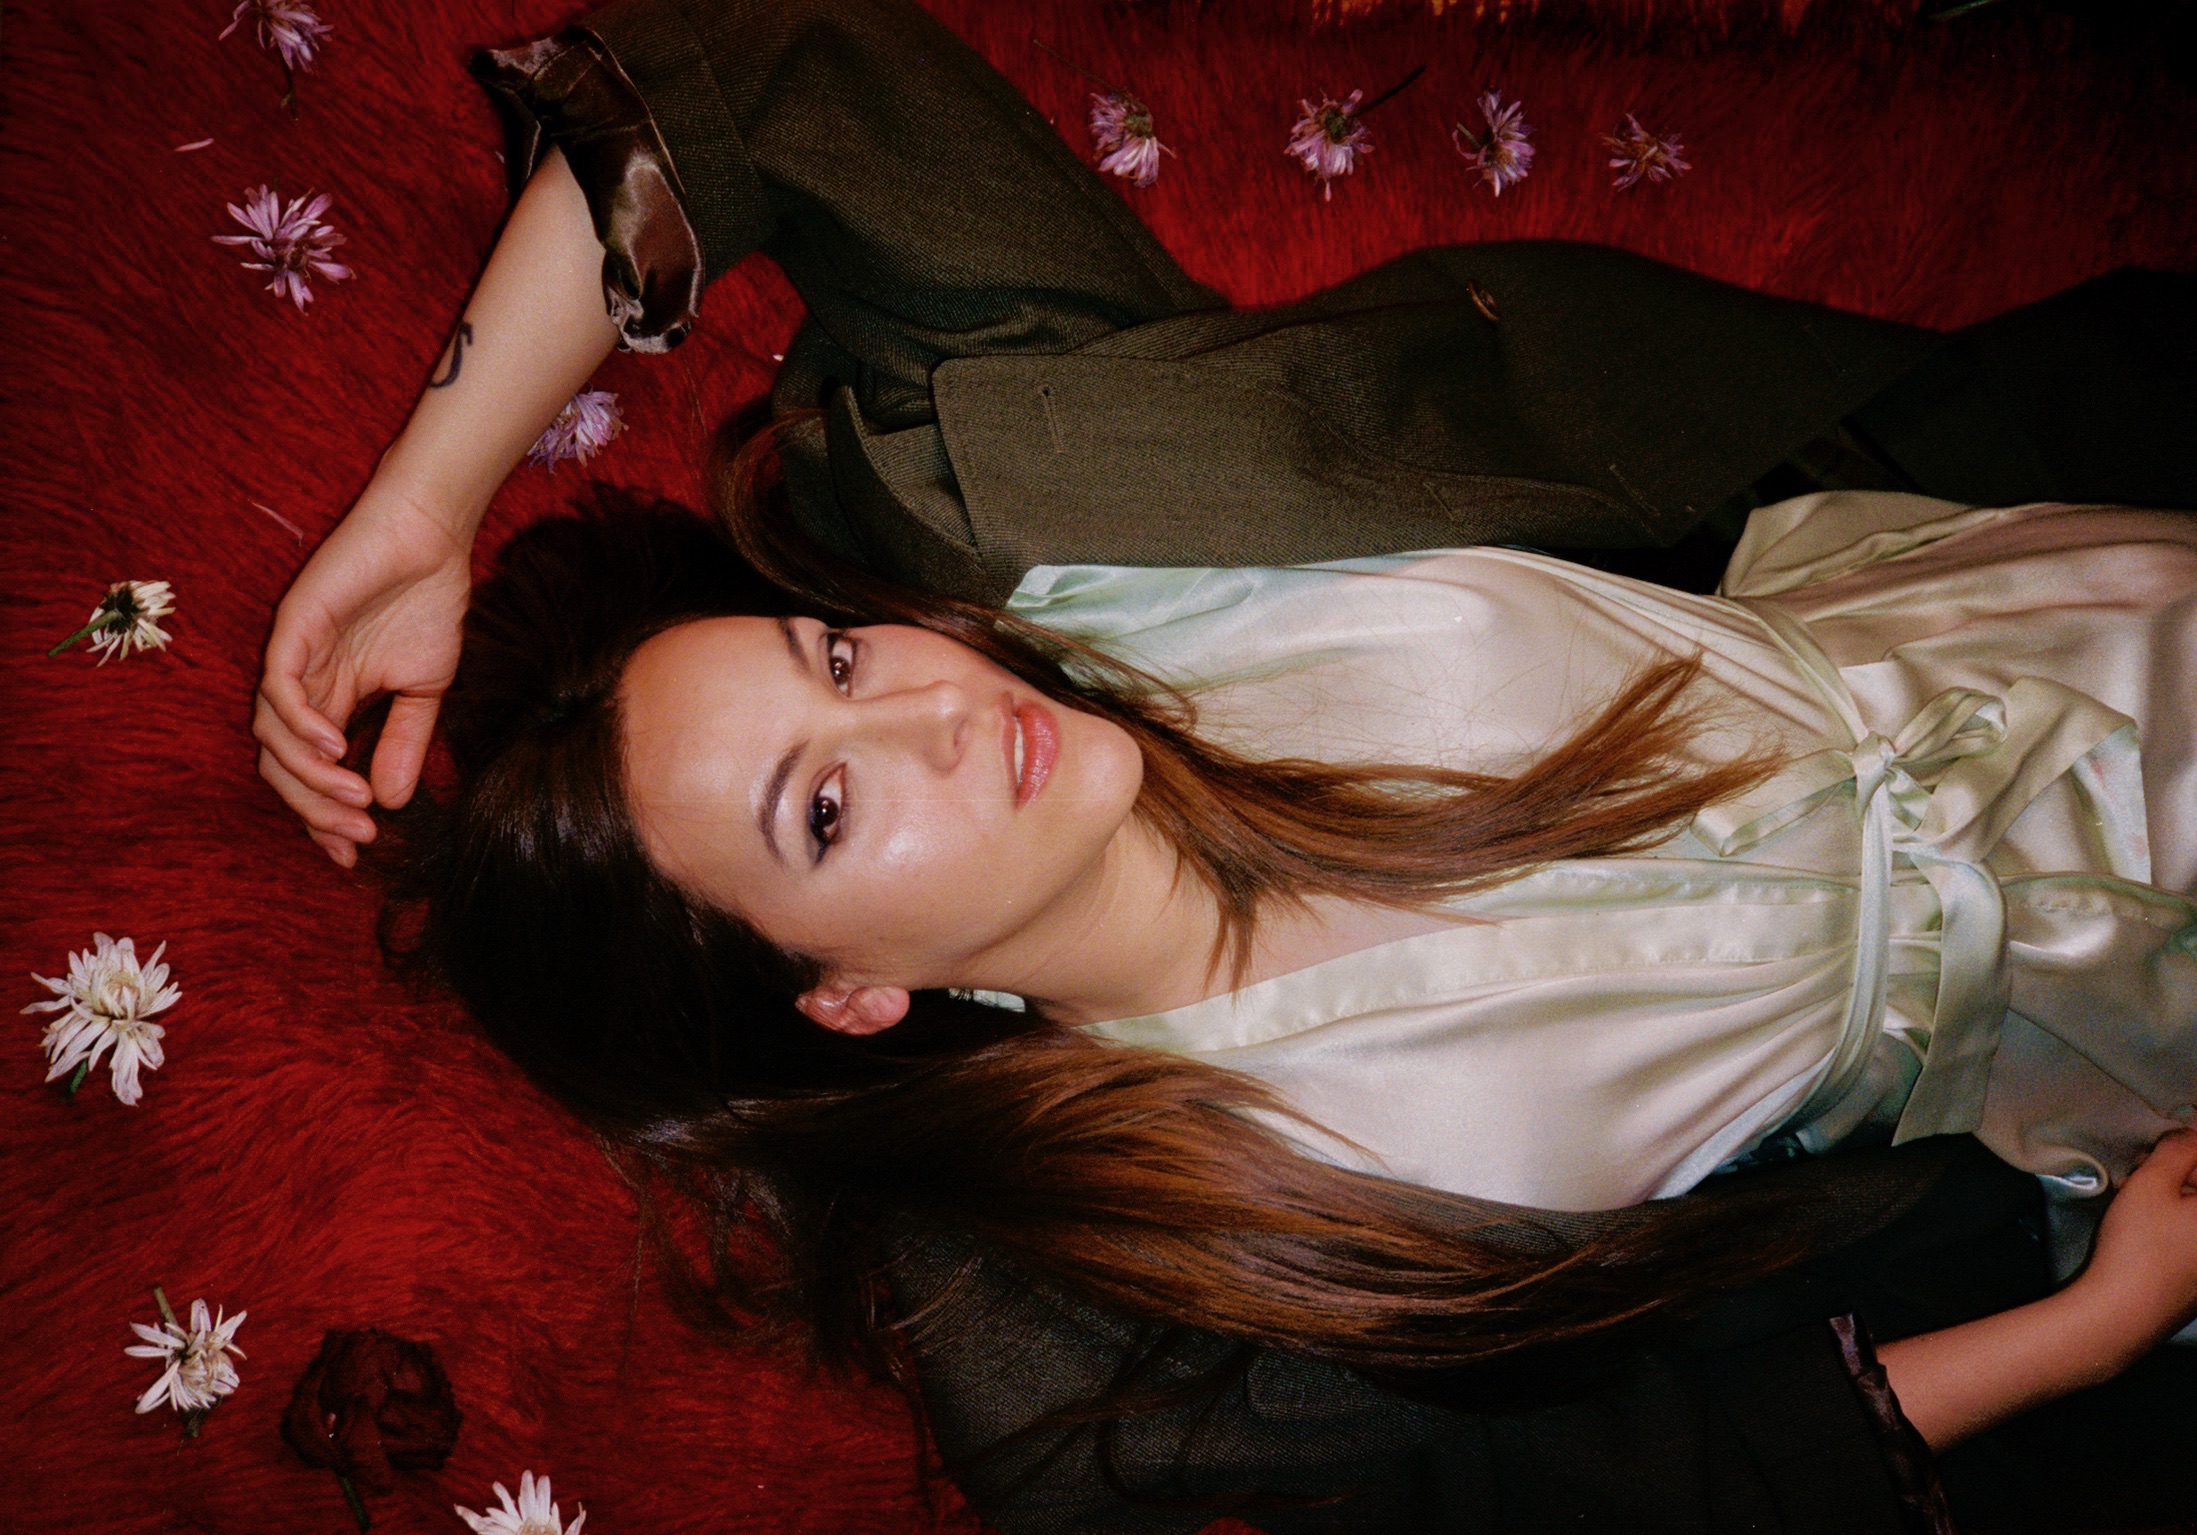 musican delia debit martinez lying on red carpet surrounded by flowers